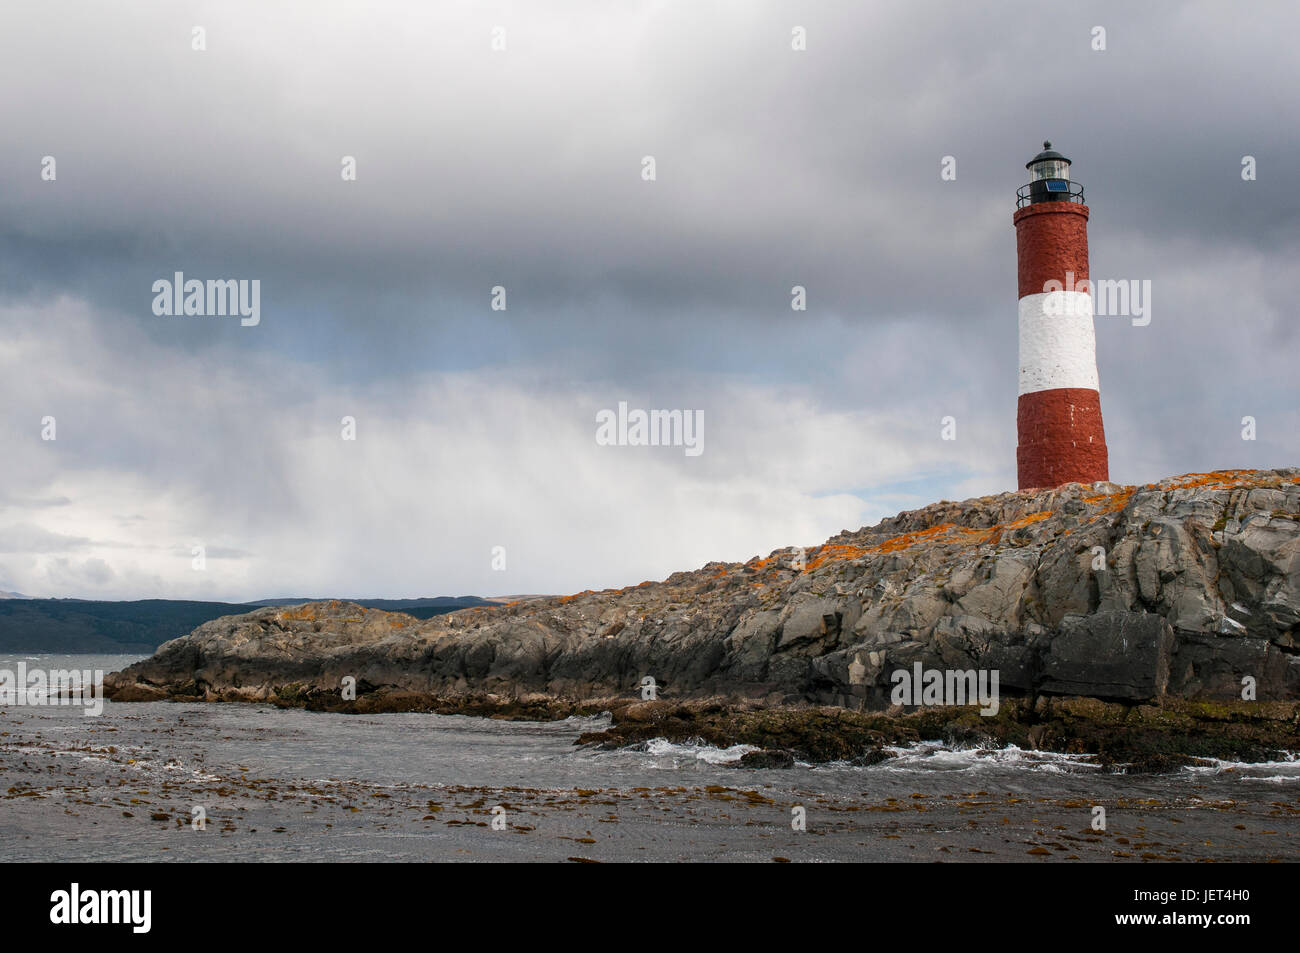 Beagle channel, Argentina, South America Stock Photo